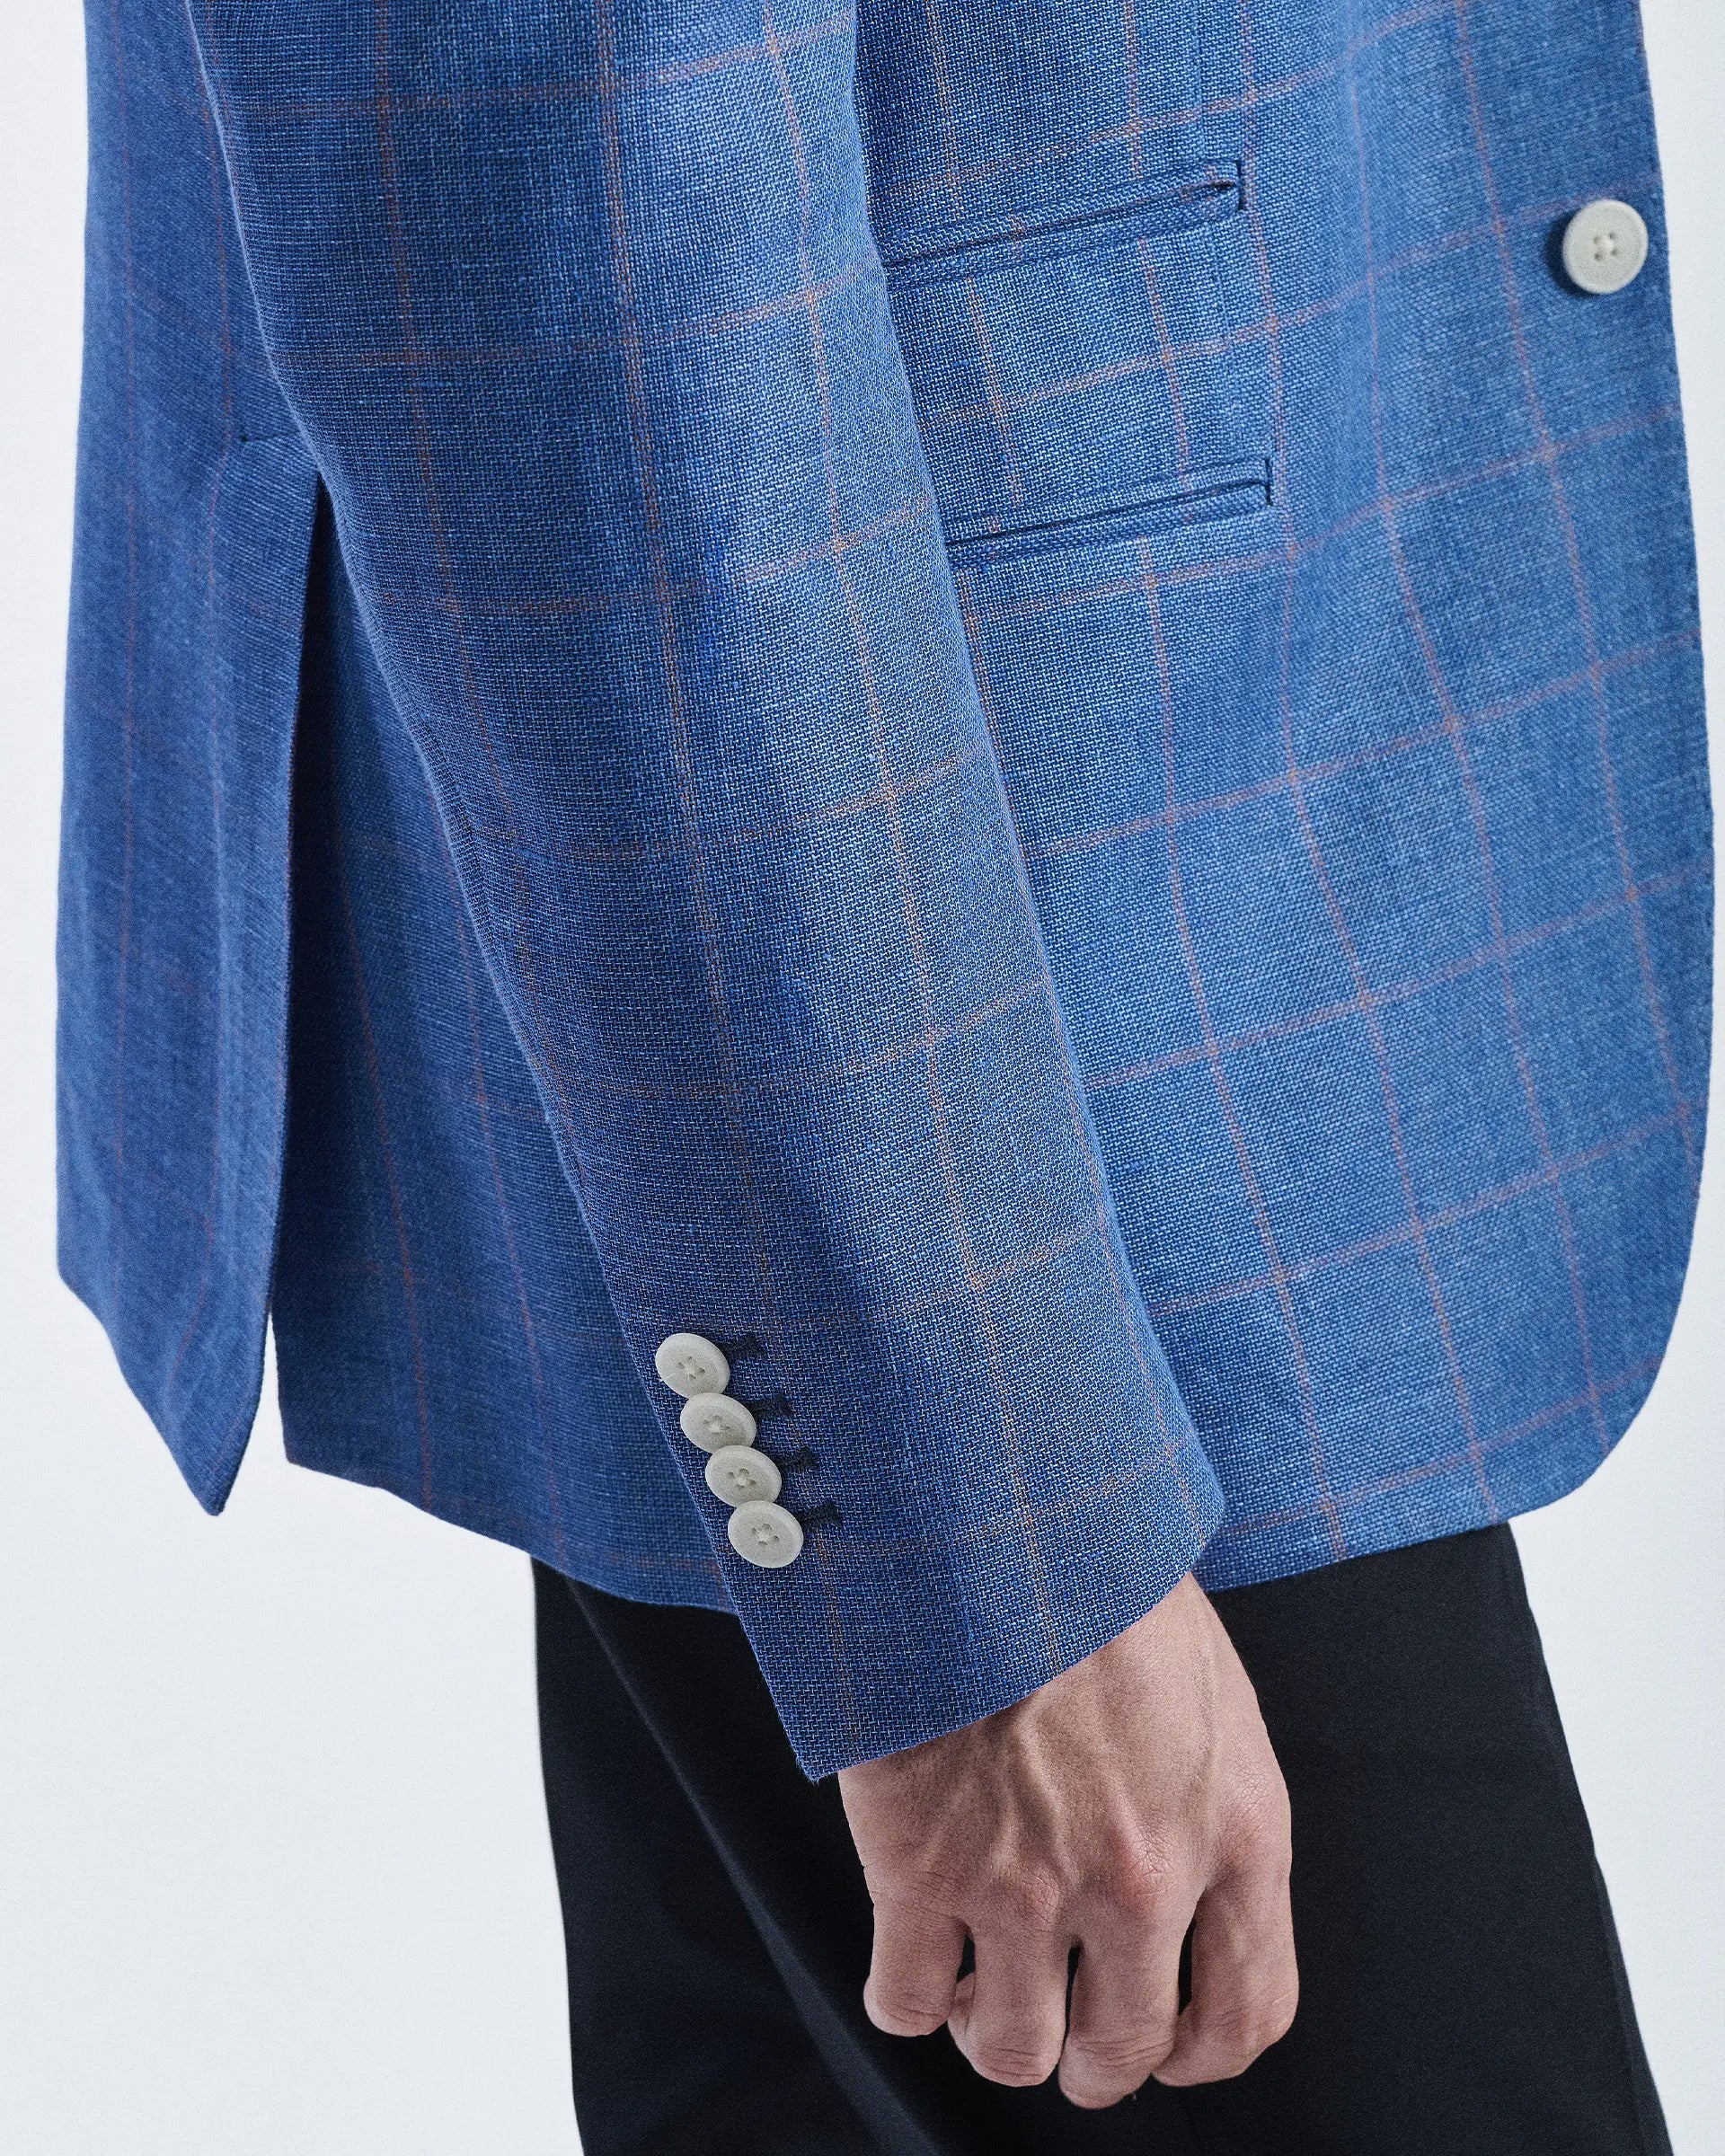 Light blue check jacket in Tollegno "Icelinen" fabric